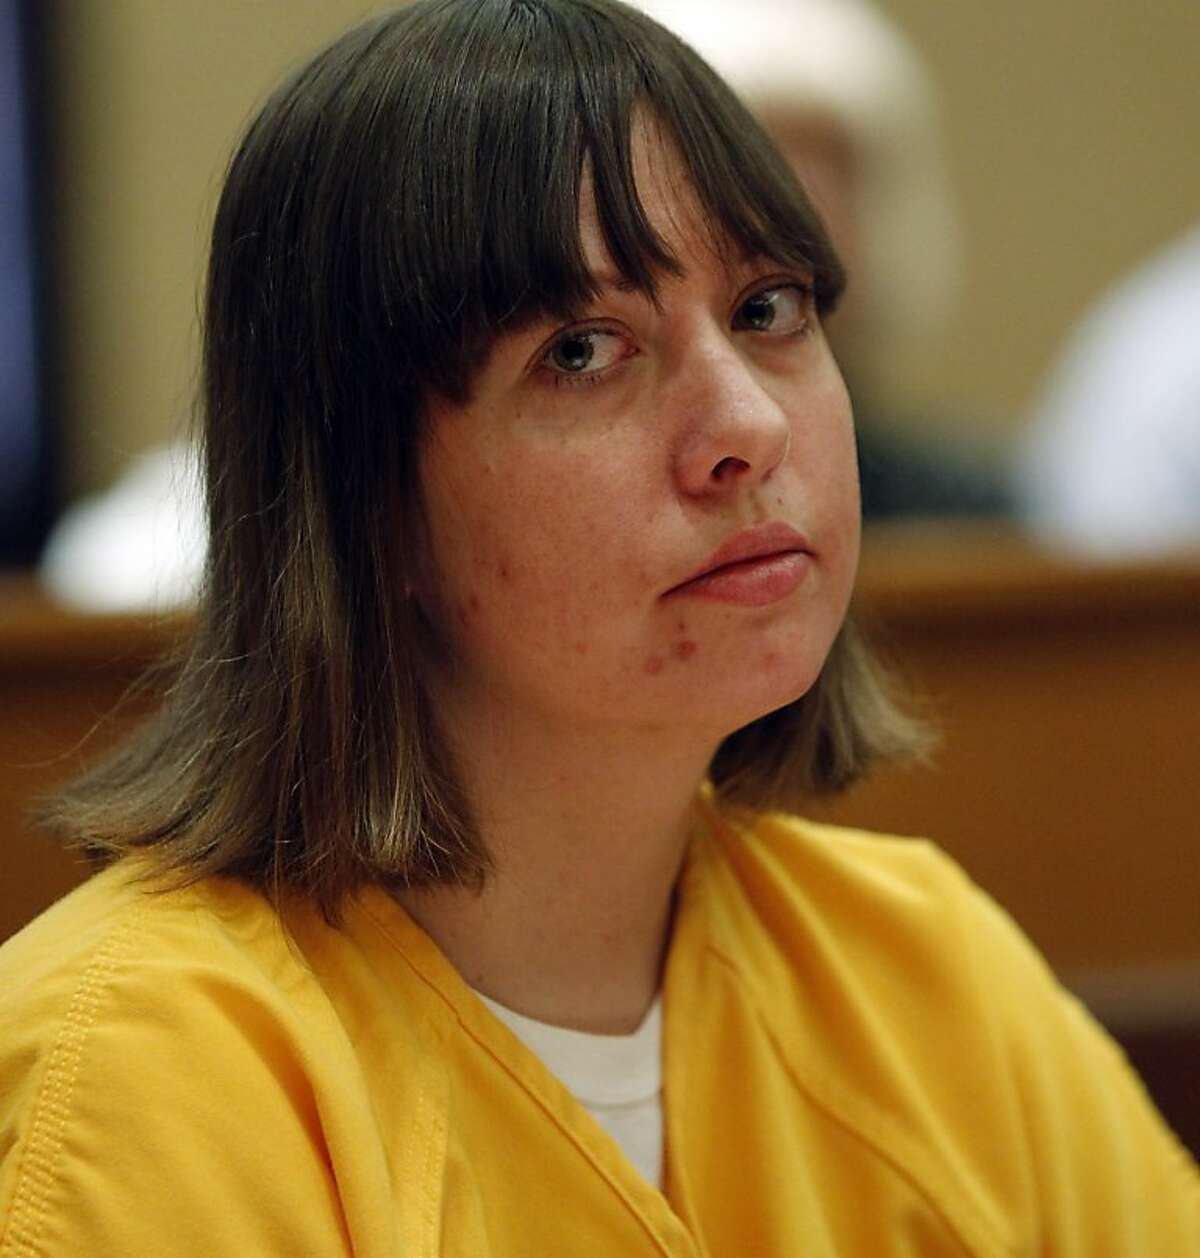 Lee Grace Dougherty is pictured in district court where she,was sentenced to 24 years in prison on charges stemming from her and her brothers and their shootout and capture in Colorado during district court in Walsenburg, Colo., on Monday, April 30, 2012. All three siblings were sentenced on Monday. The three are accused of shooting at a police officer and staging a daring bank robbery in a cross-country crime spree that included Georgia and Florida. The manhunt for them ended after an Aug. 10 freeway chase and shootout with police in southern Colorado. (AP Photo/Ed Andrieski, Pool)